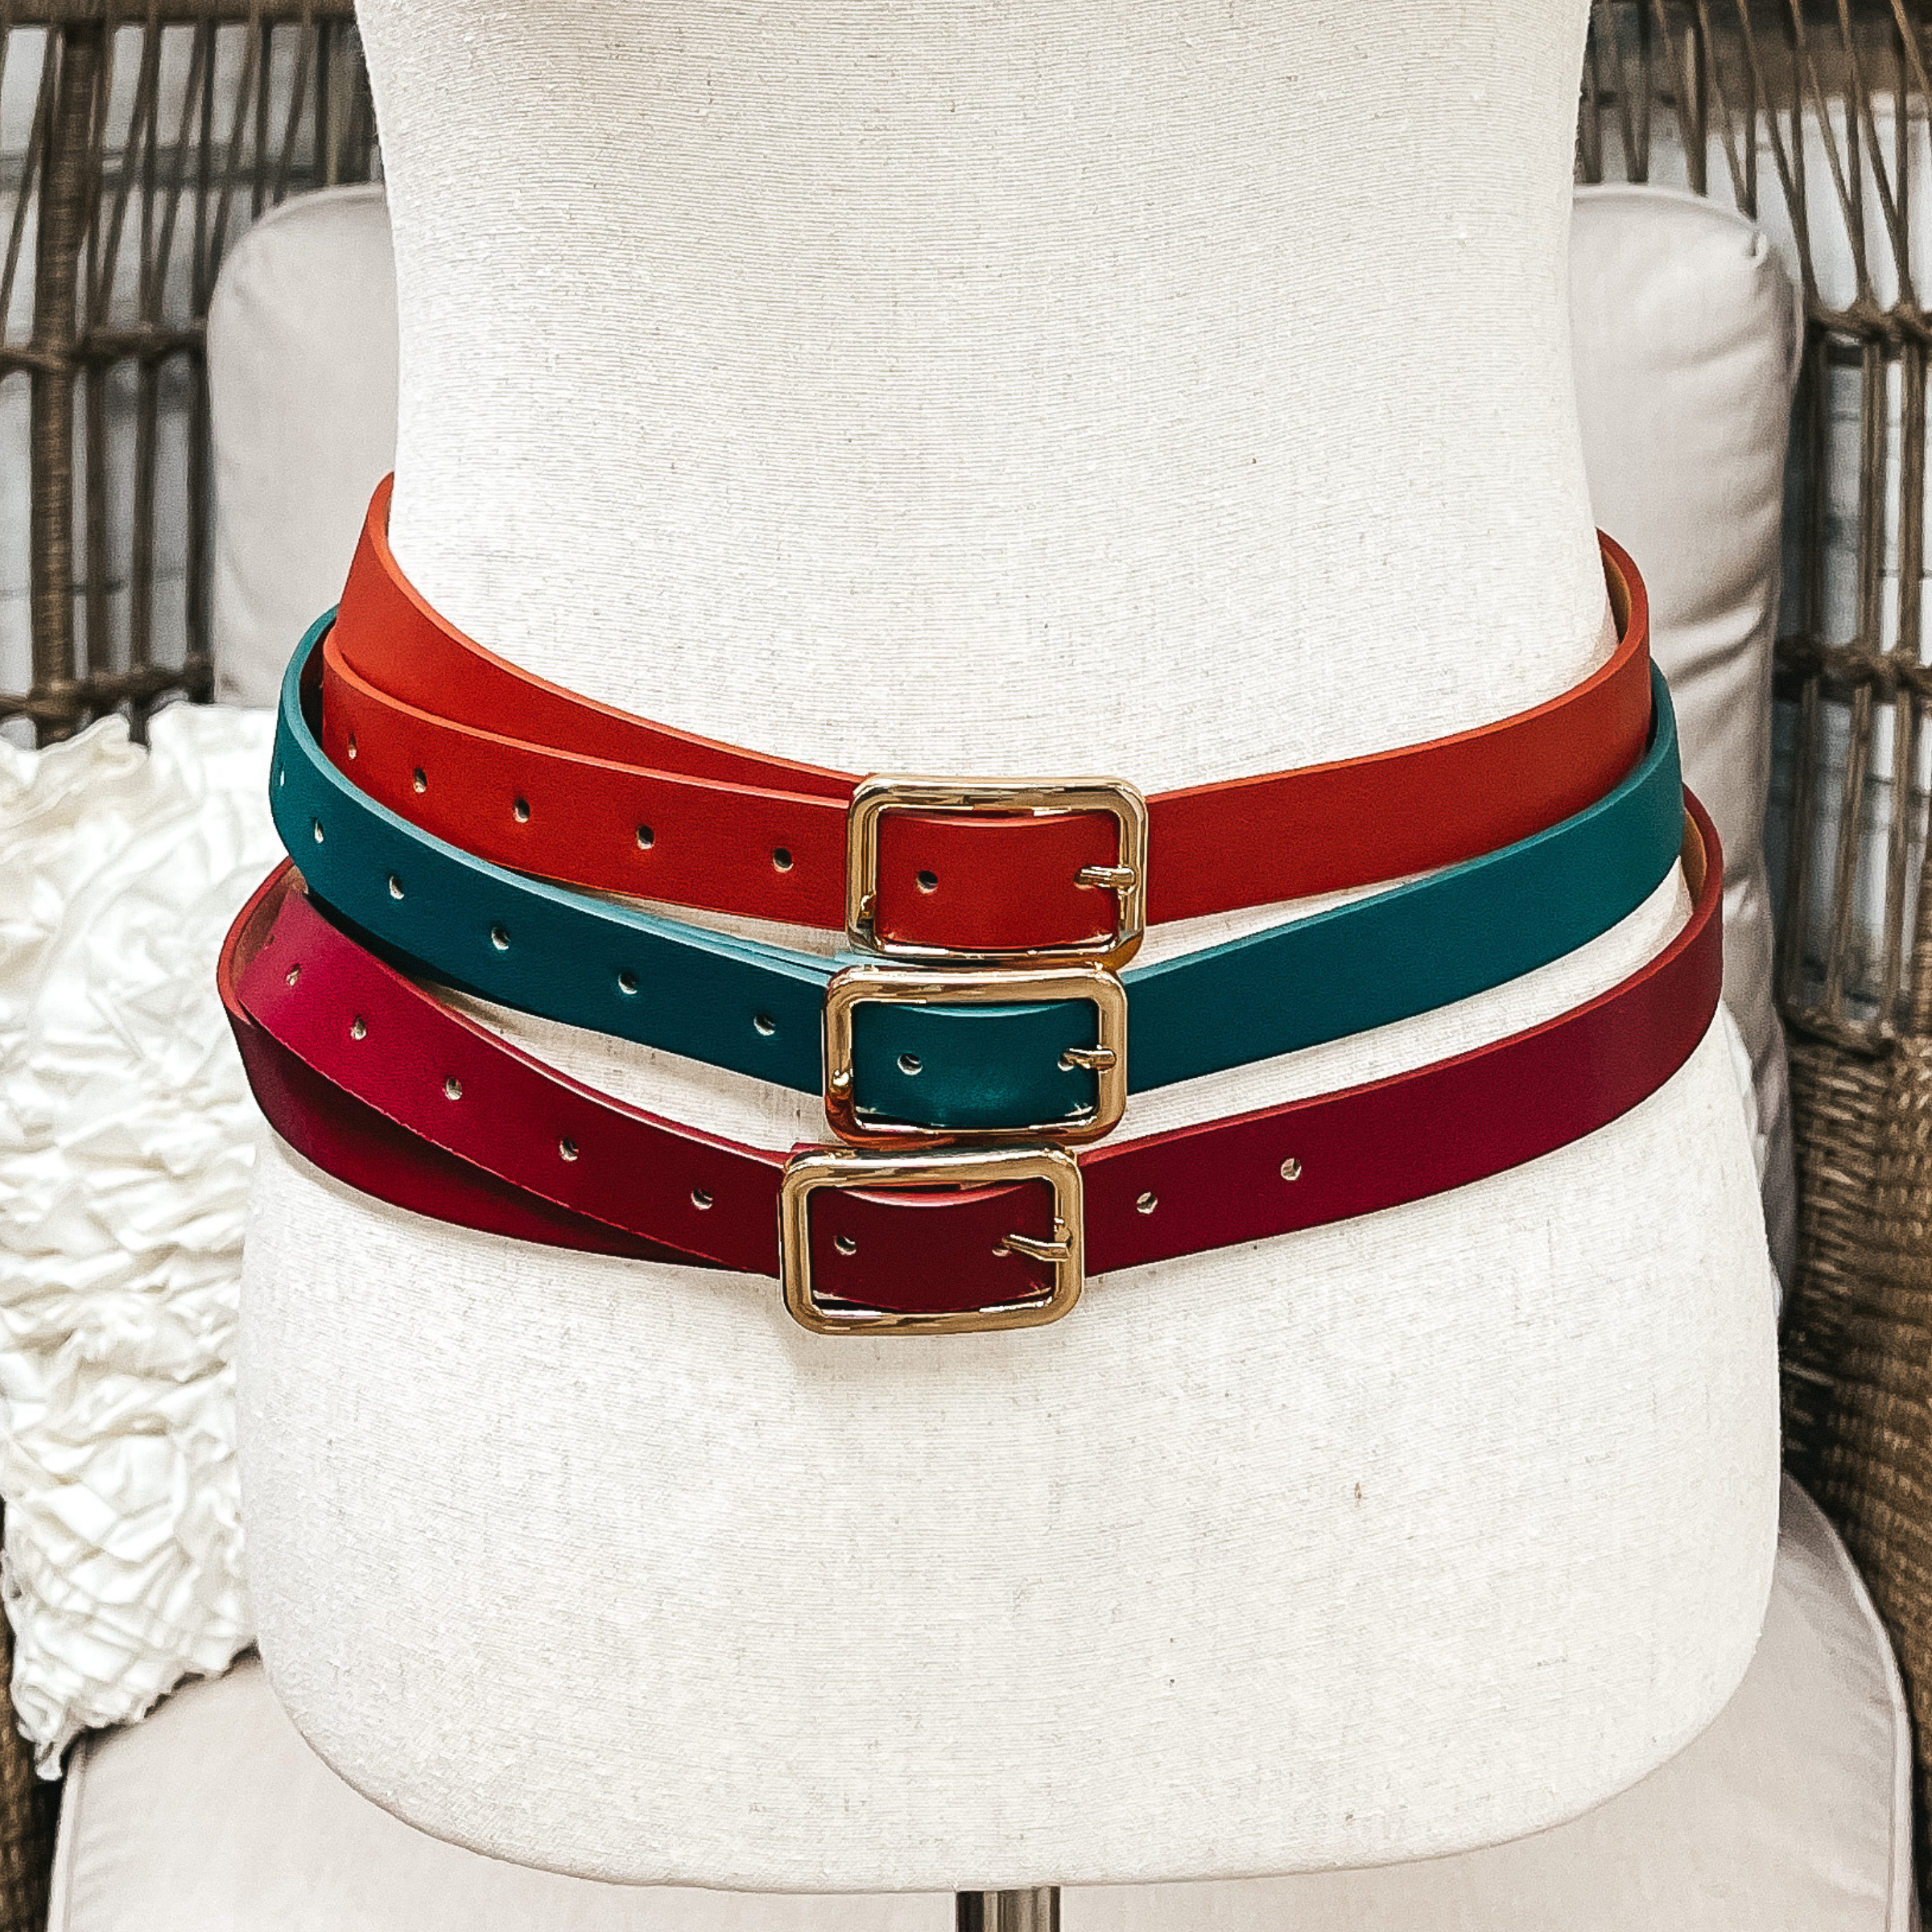 There are three skinny belts in three different colors on an ivory mannequin. From top to bottom; cognac, dark teal/green, and burgundy, all three belts have a gold rectangle buckle.